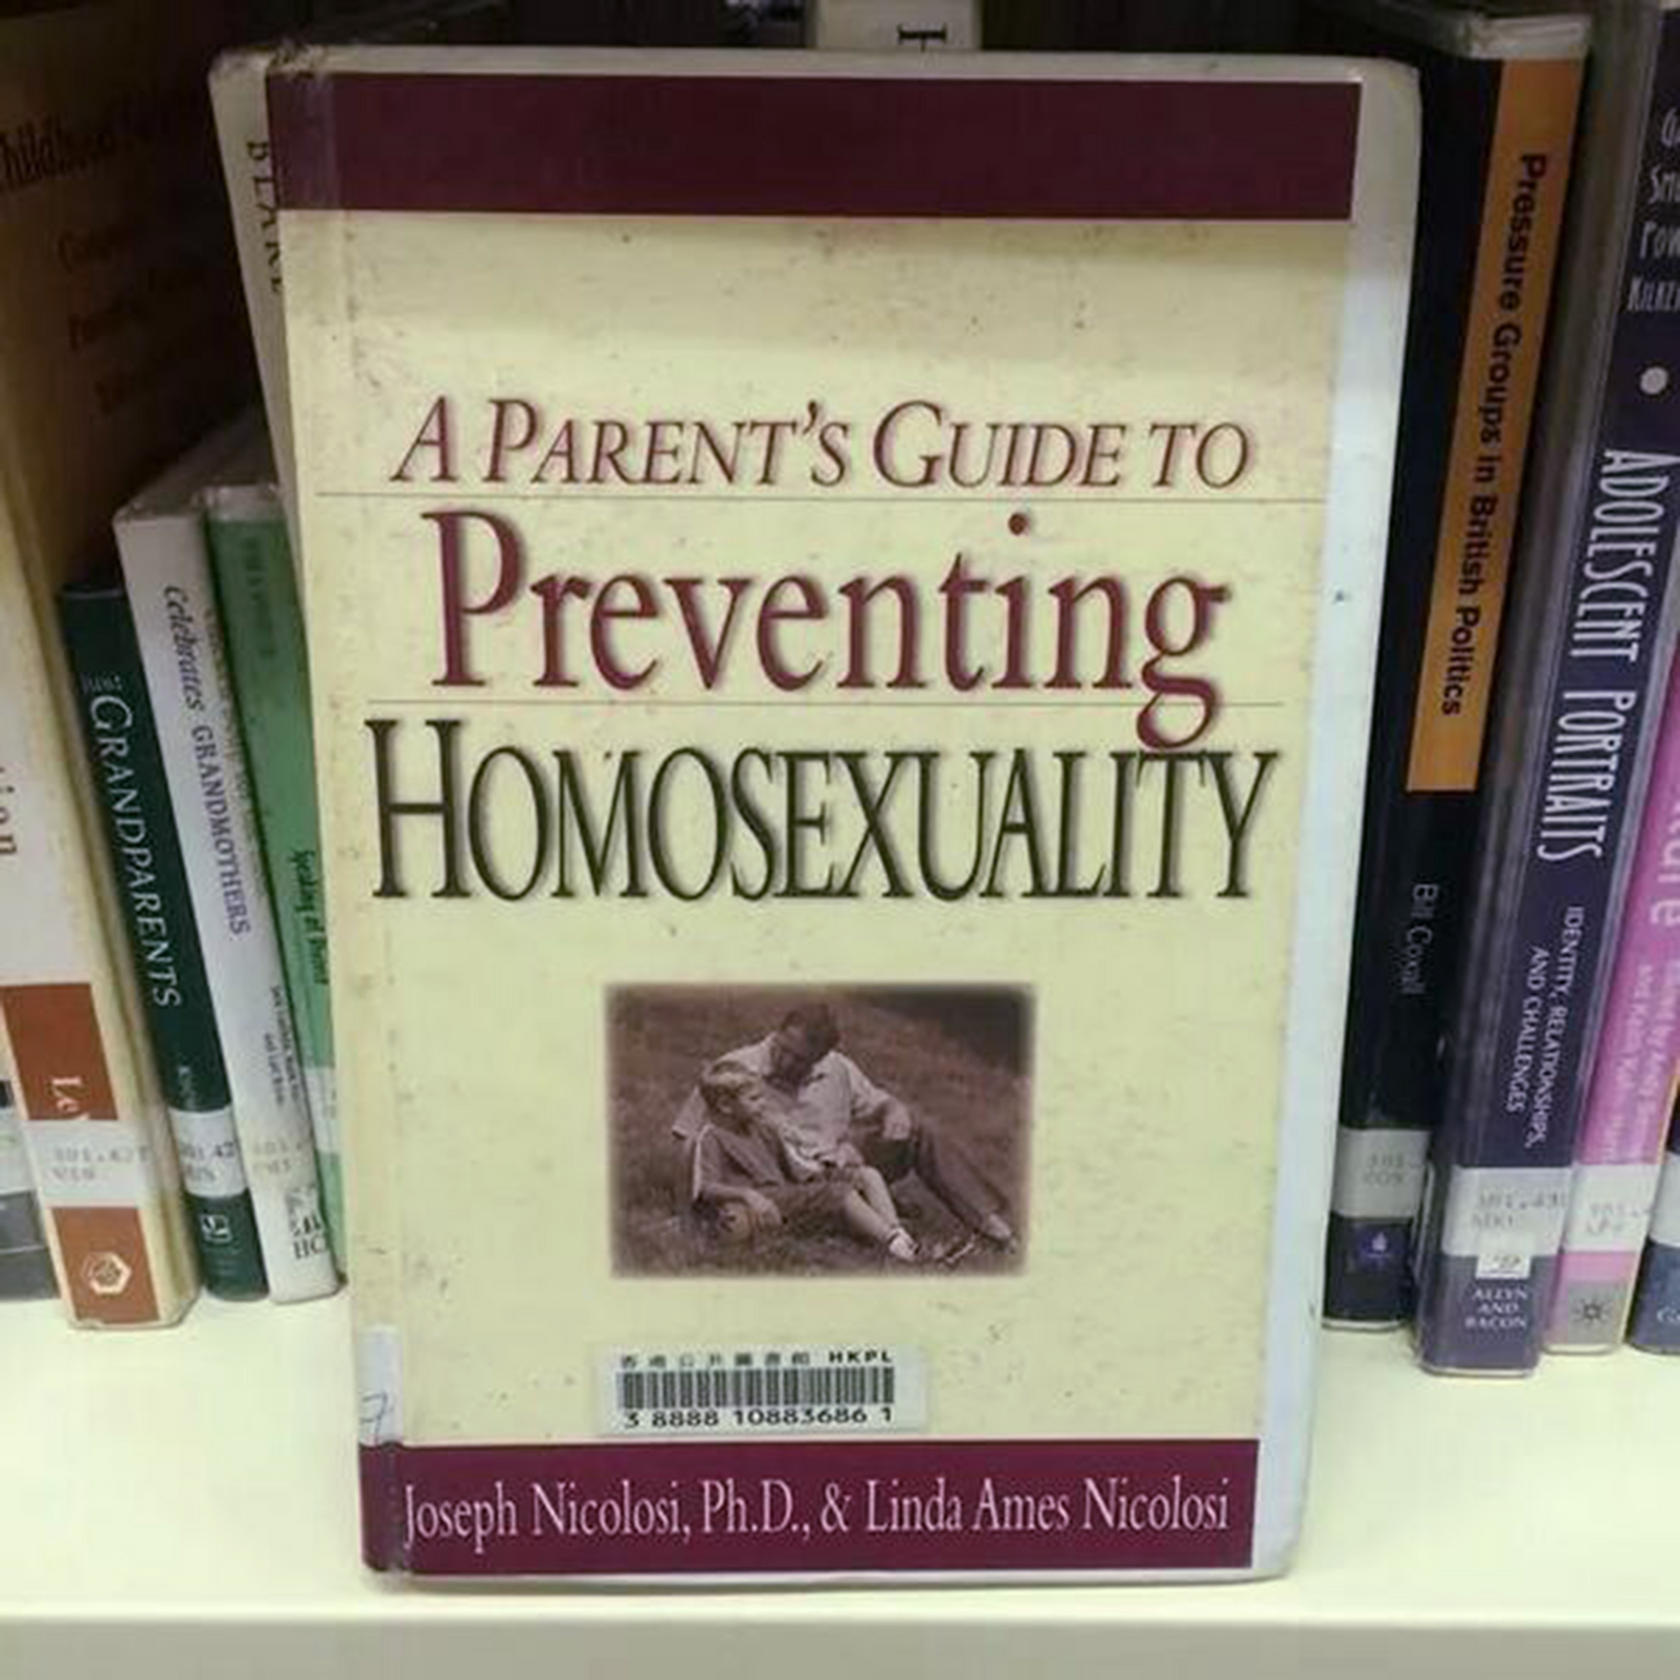 A Parent's Guide to Preventing Homosexuality Hong Kong library under